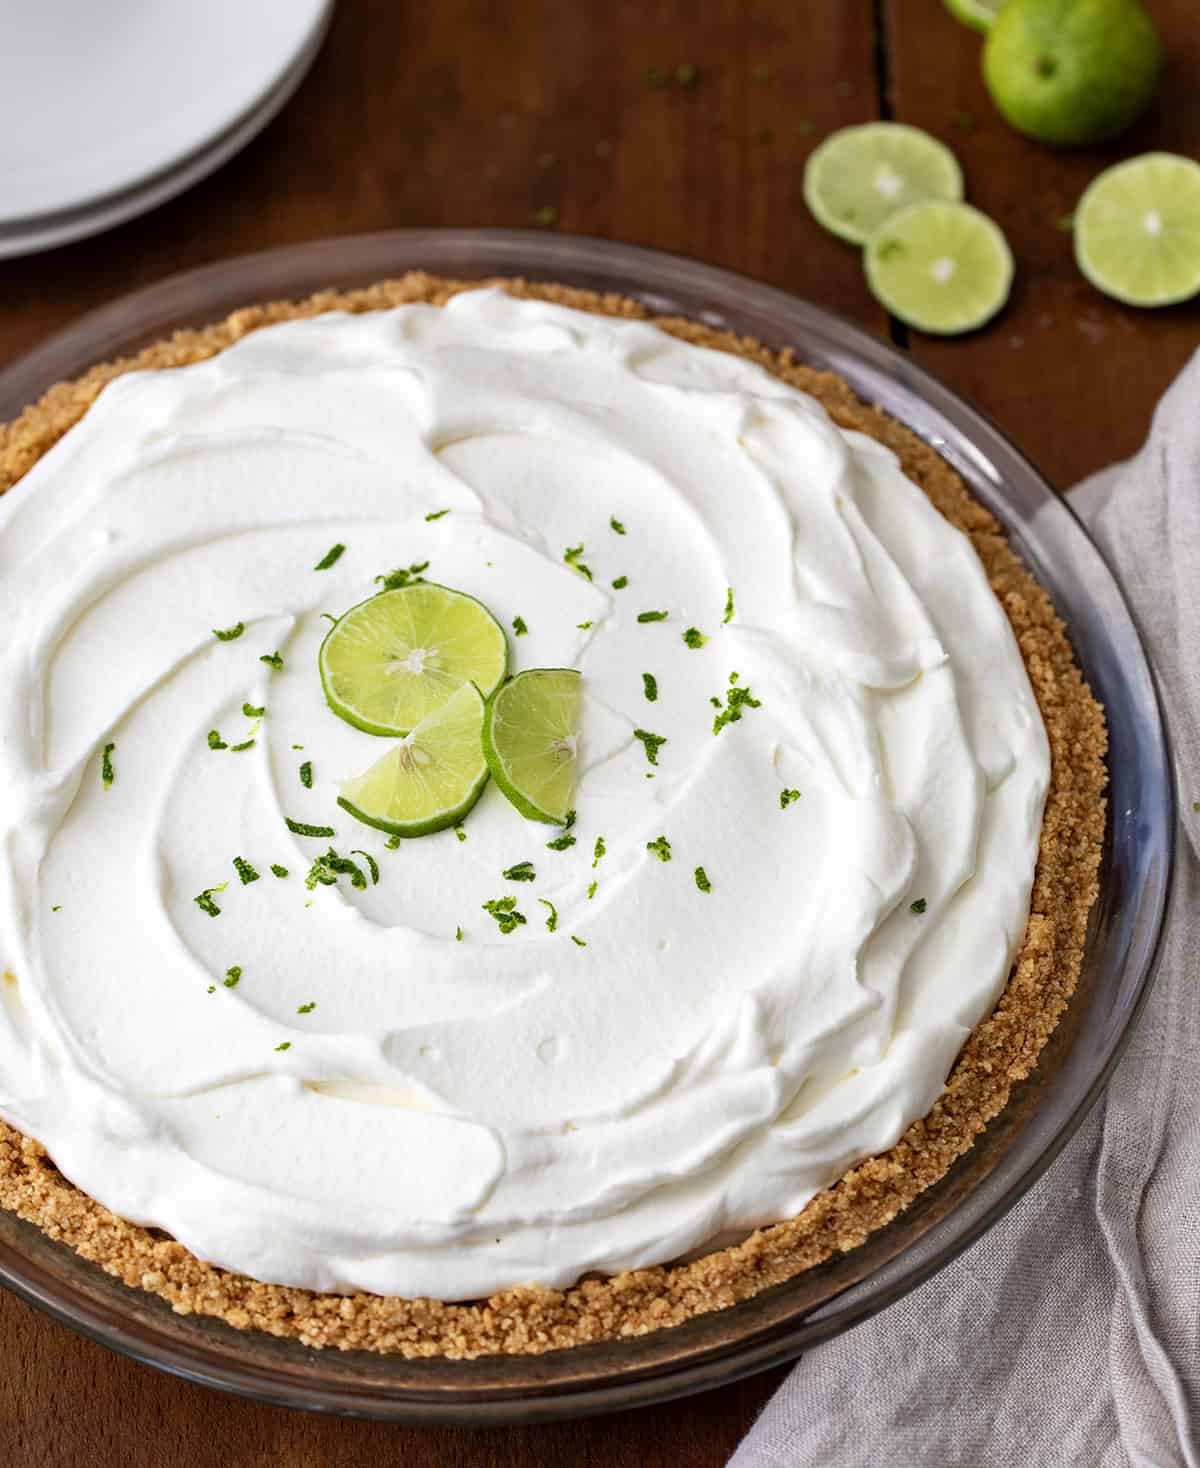 Whole No Bake Key Lime Pie on a wooden table with fresh key limes garnish on top.